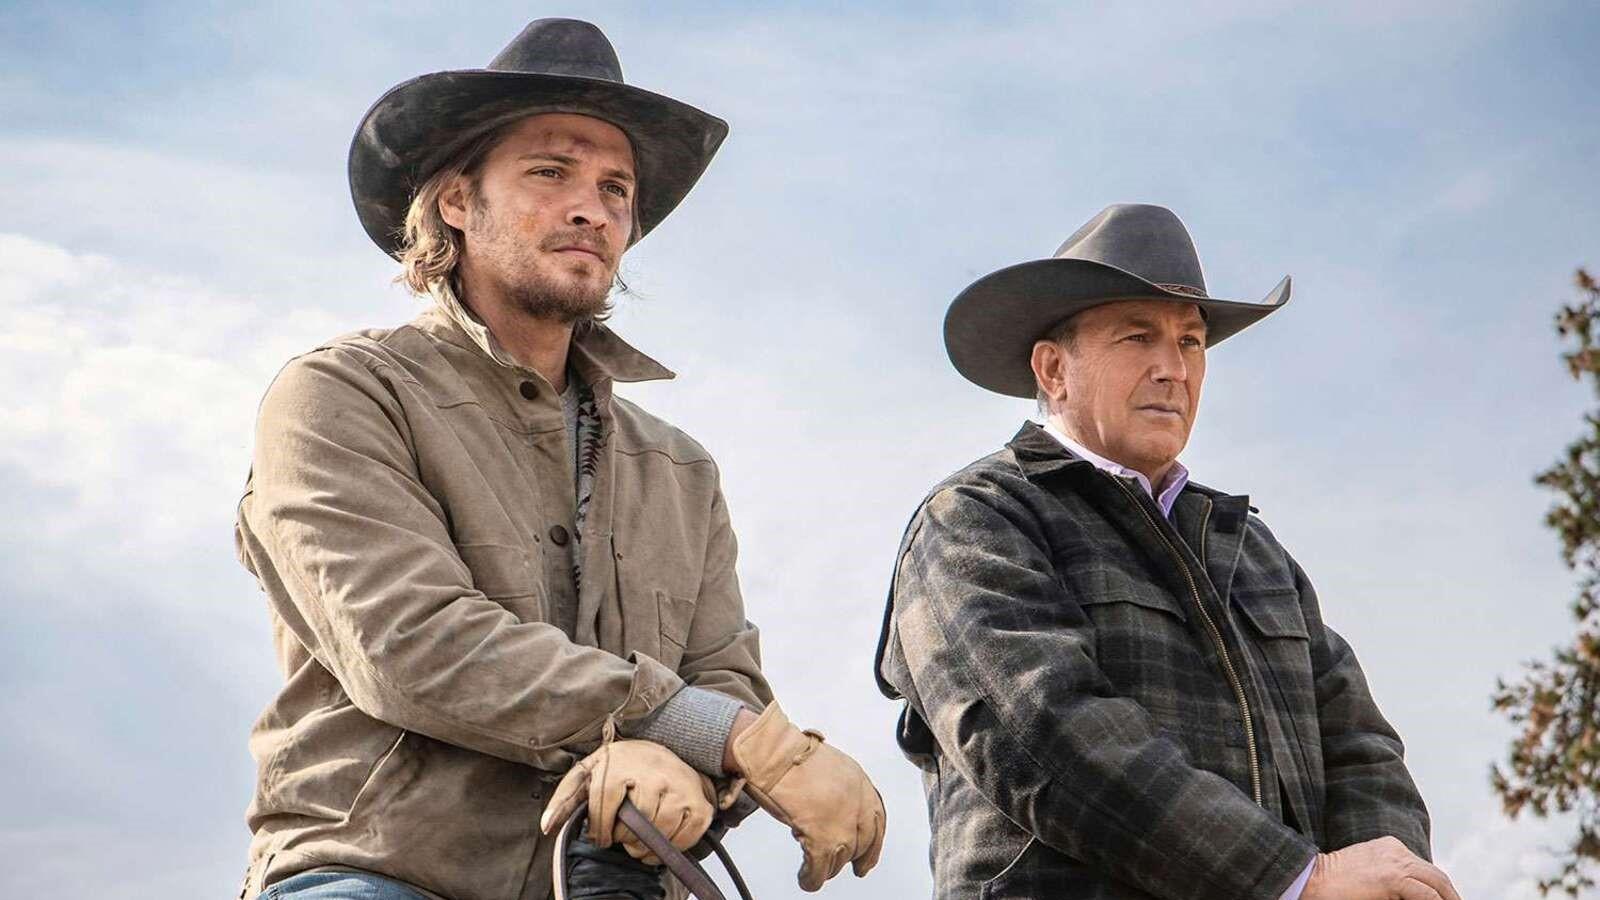 Luke Grimes and Kevin Costner as Kayce and John Dutton in Yellowstone, sitting on horses and looking into the distance